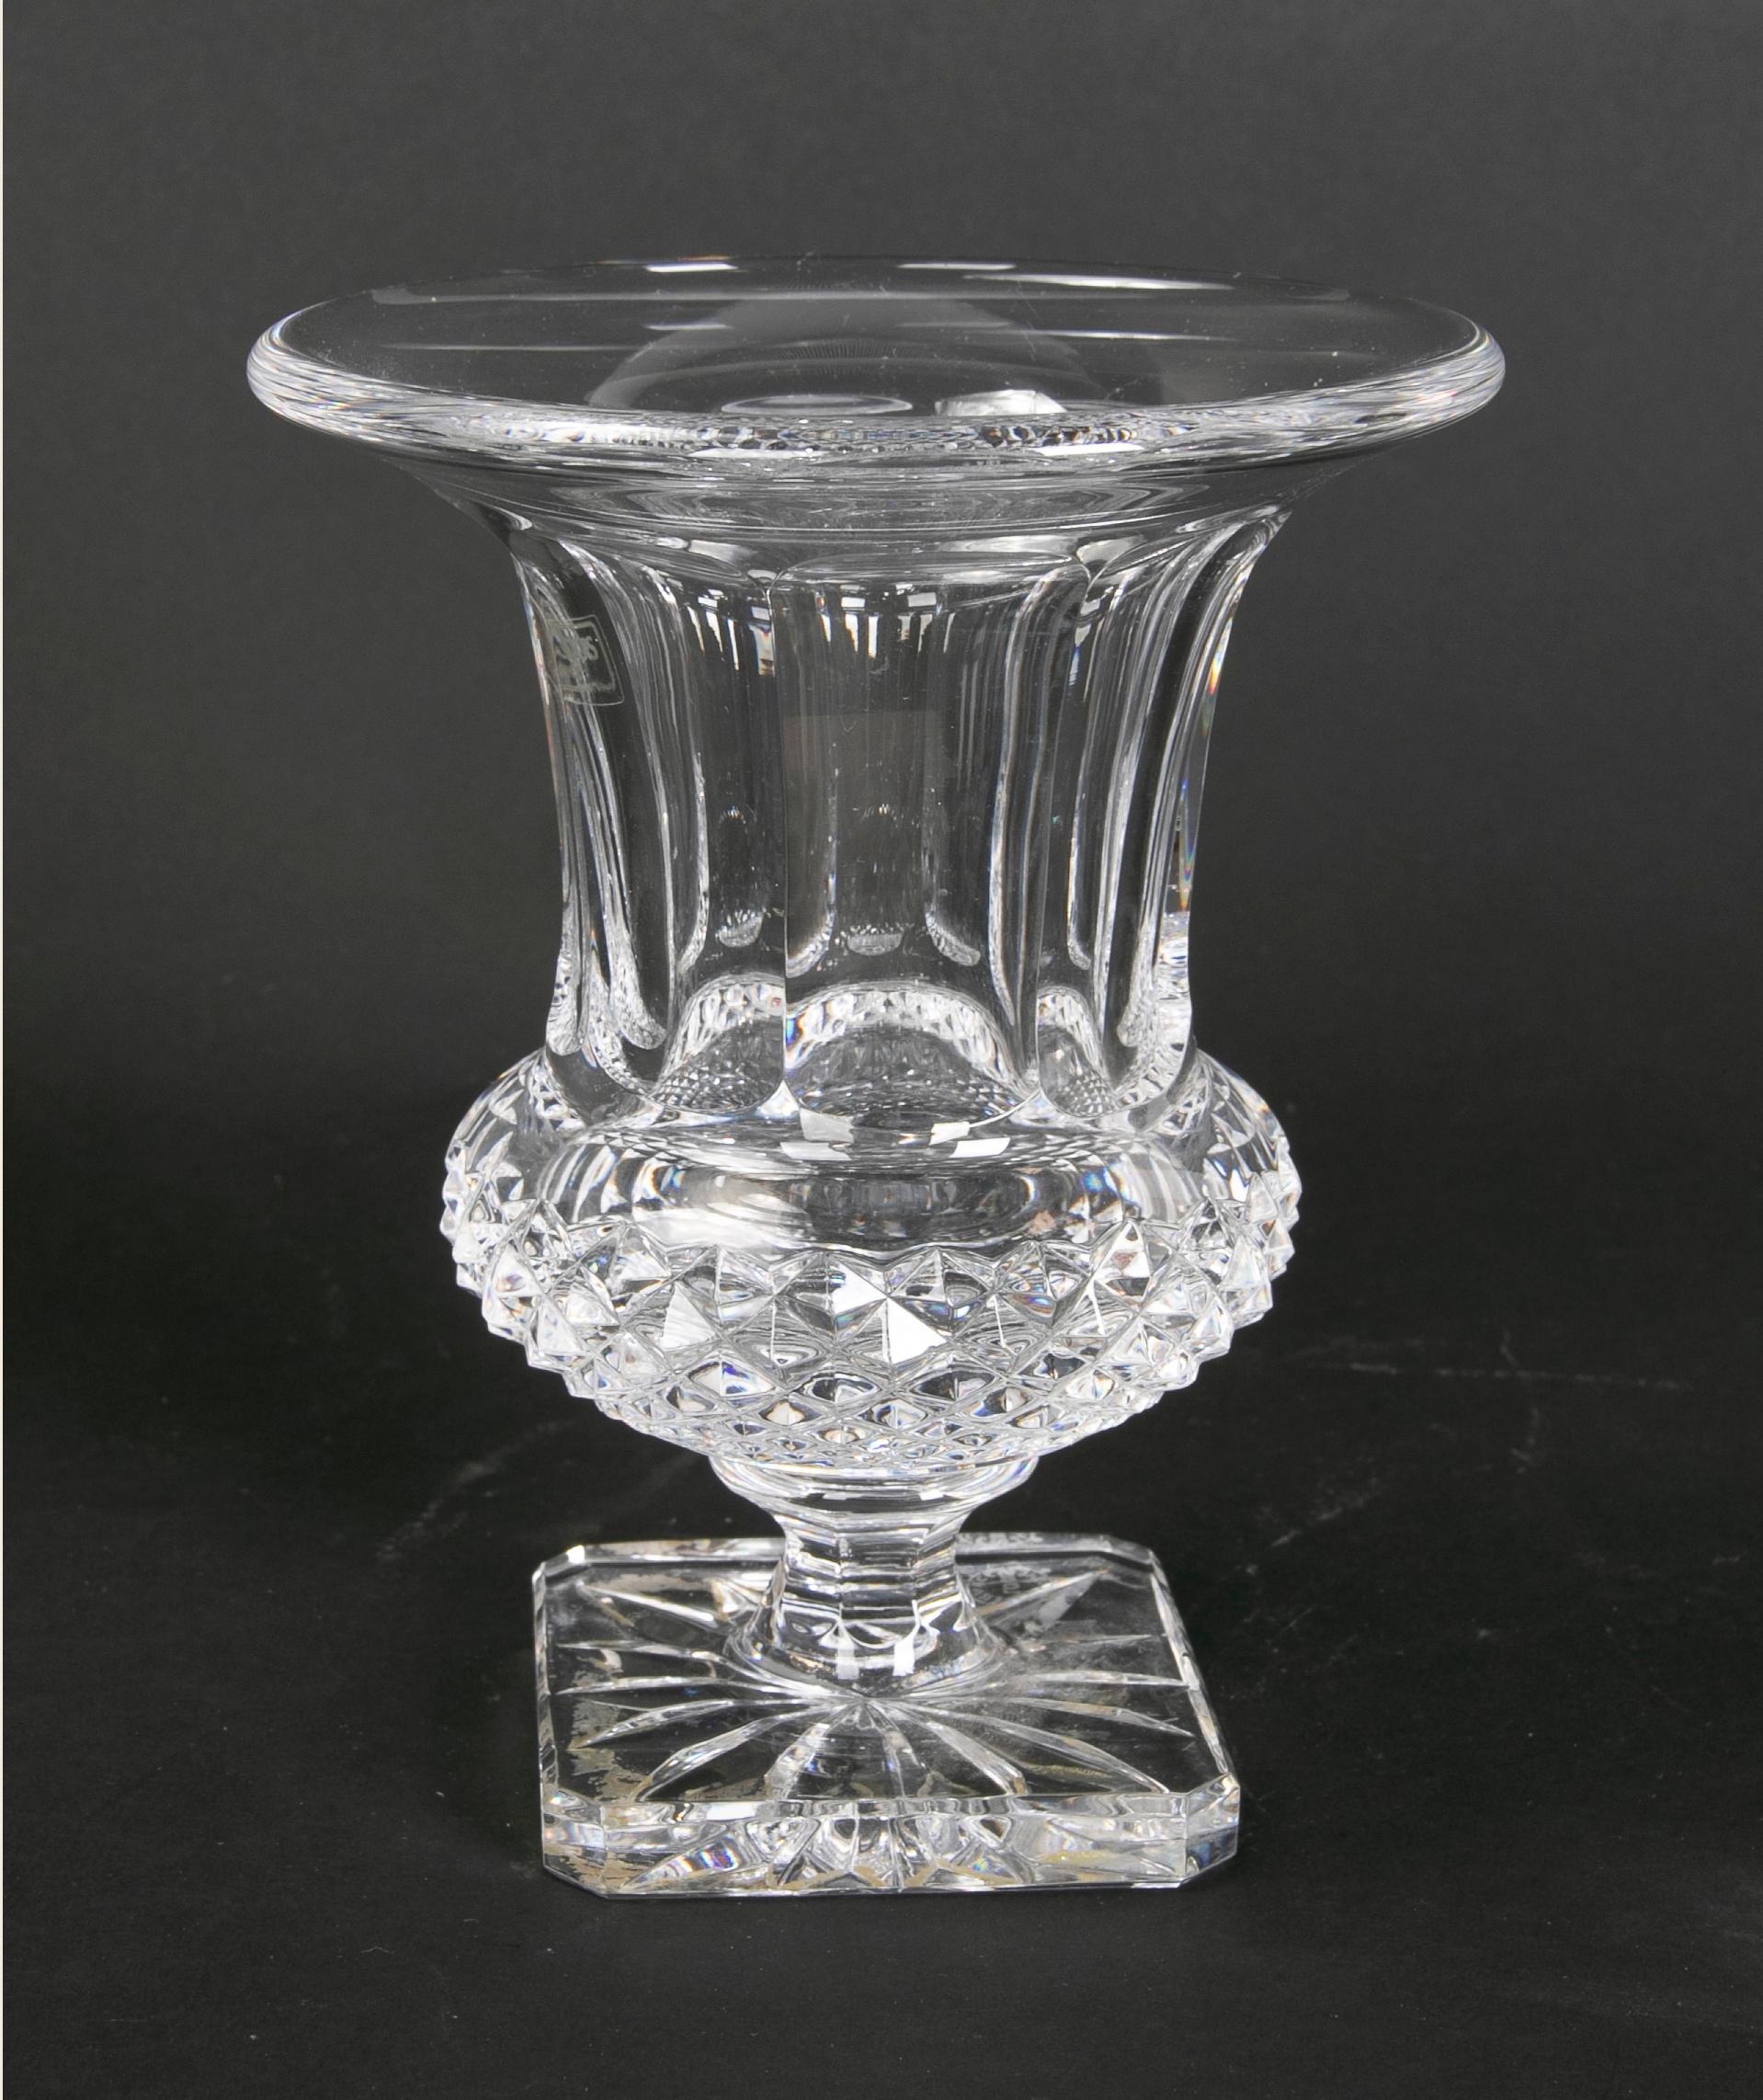 1980s French hand-carved crystal glass, signed Cristal Louis, France.